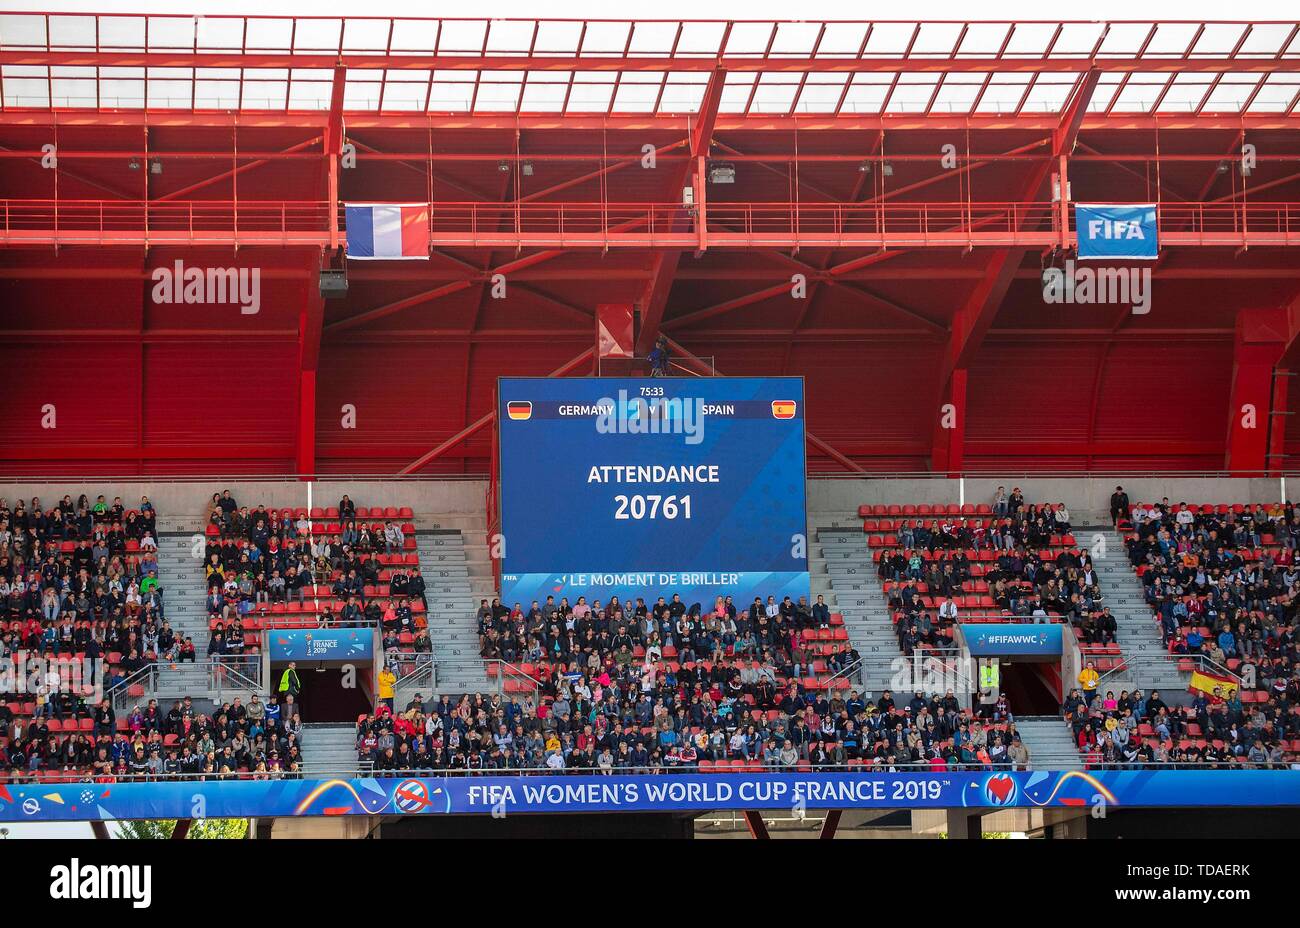 Valenciennes, France. 12th June, 2019. Feature, scoreboard with audience  number 20761, preliminary round Group B, match 15, Germany (GER) - Spain  (ESP) 1: 0, on 06/12/2019 in Valenciennes. Football Women World Cup